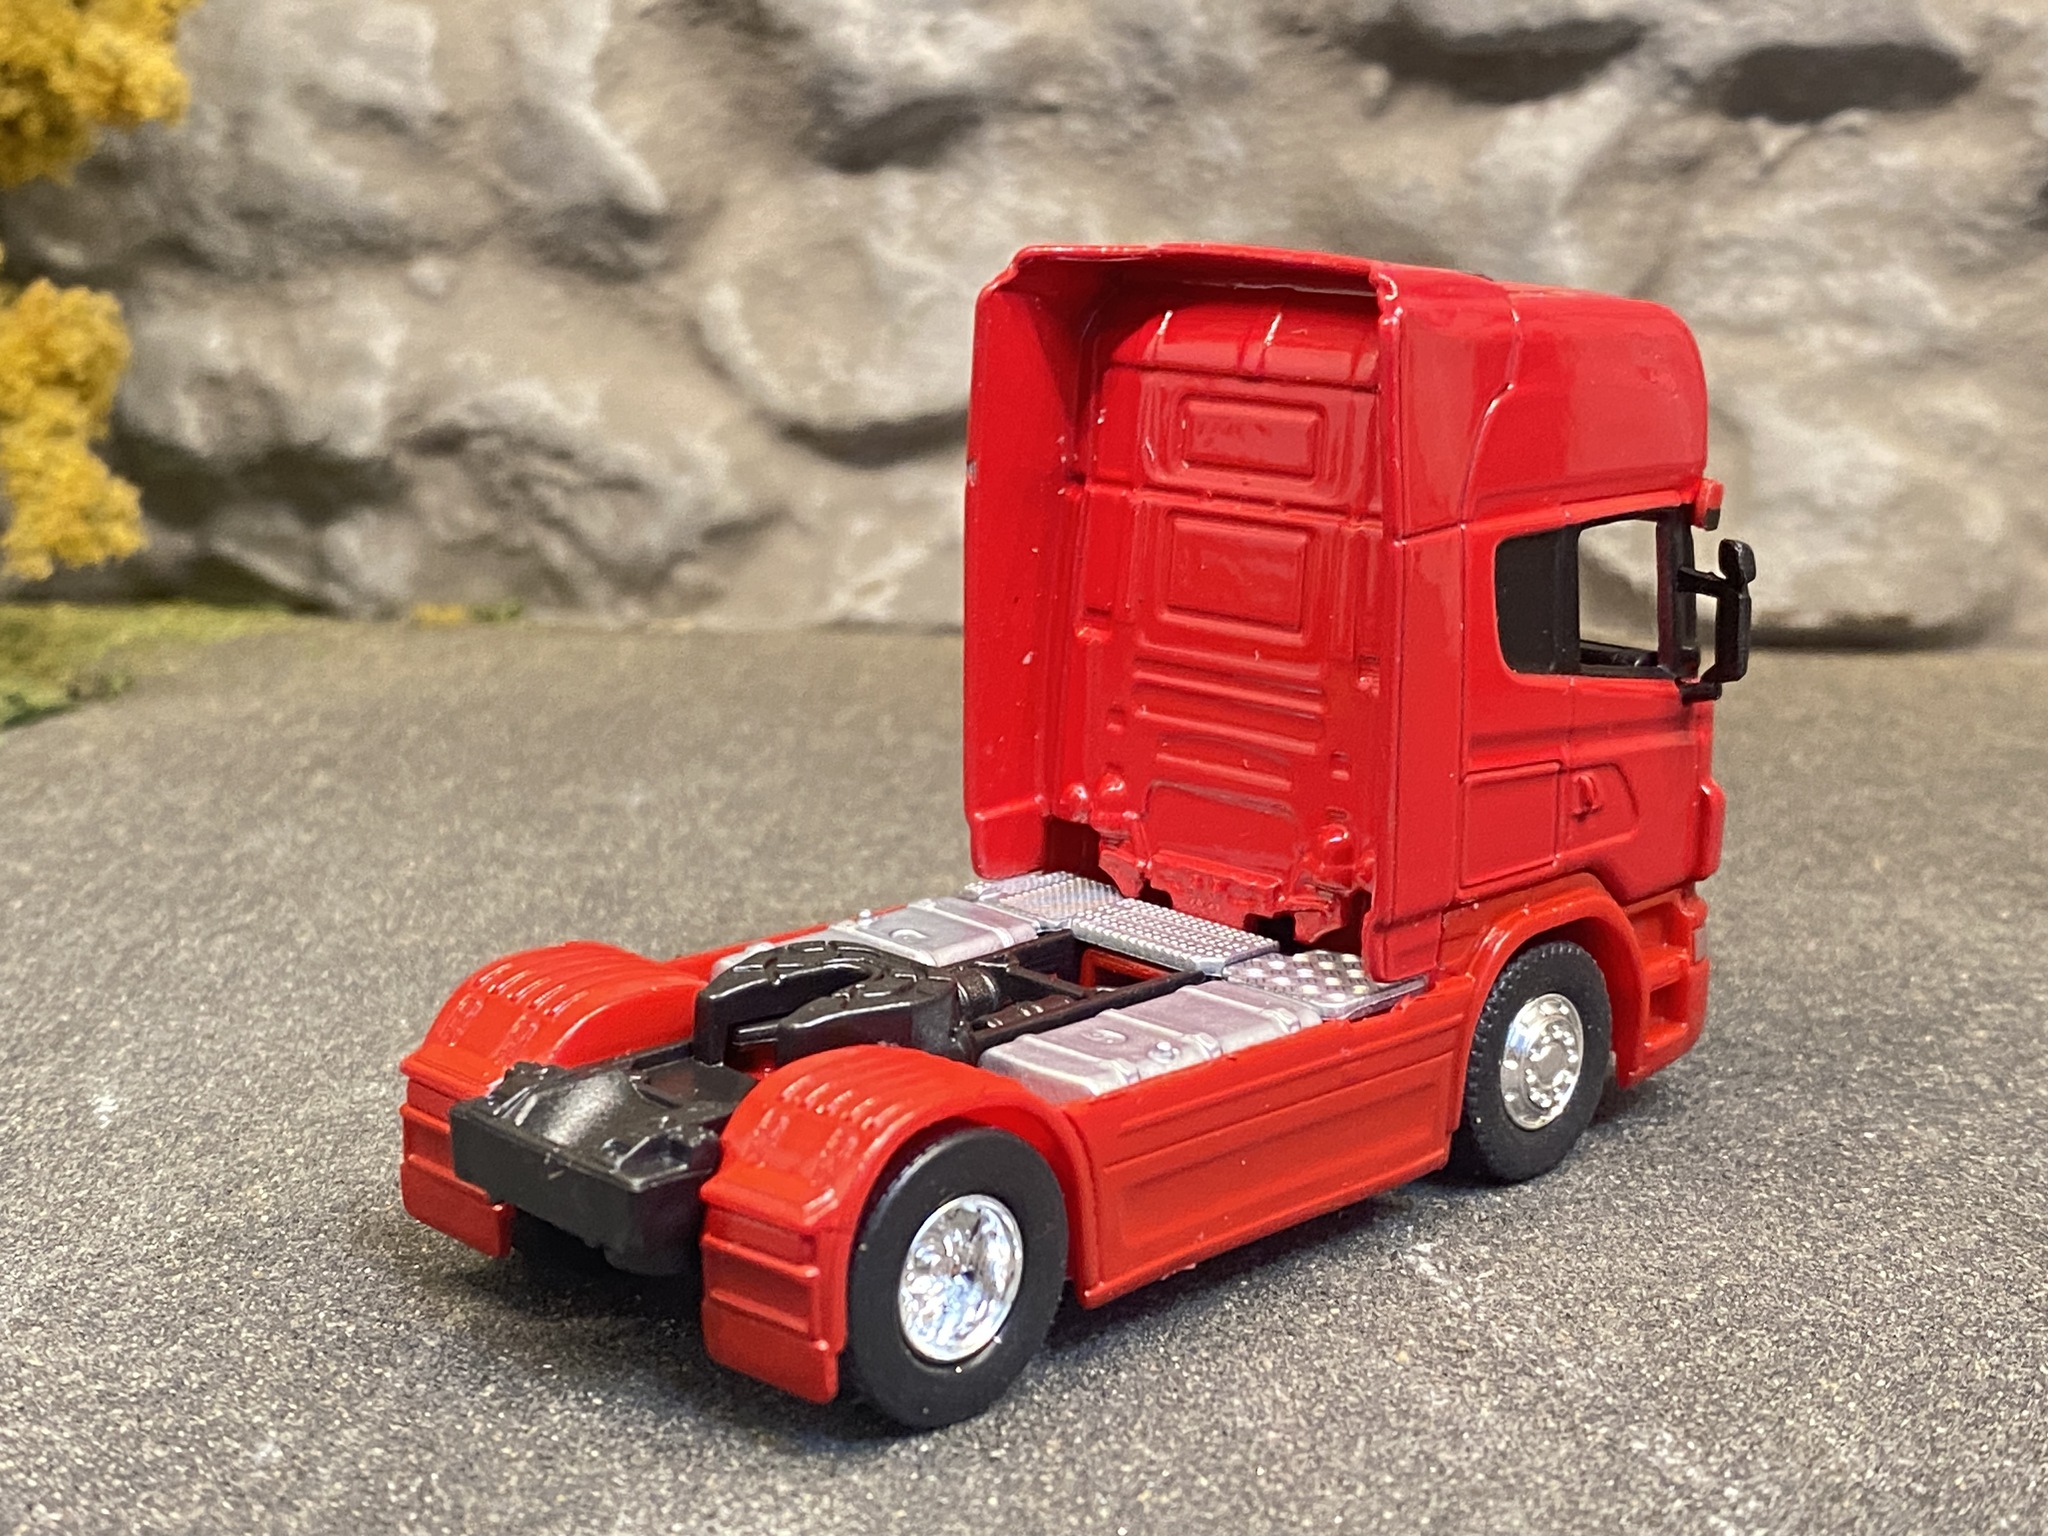 Skala 1/64 - Scania V8 R730 tractor 2-axle, red fr Welly